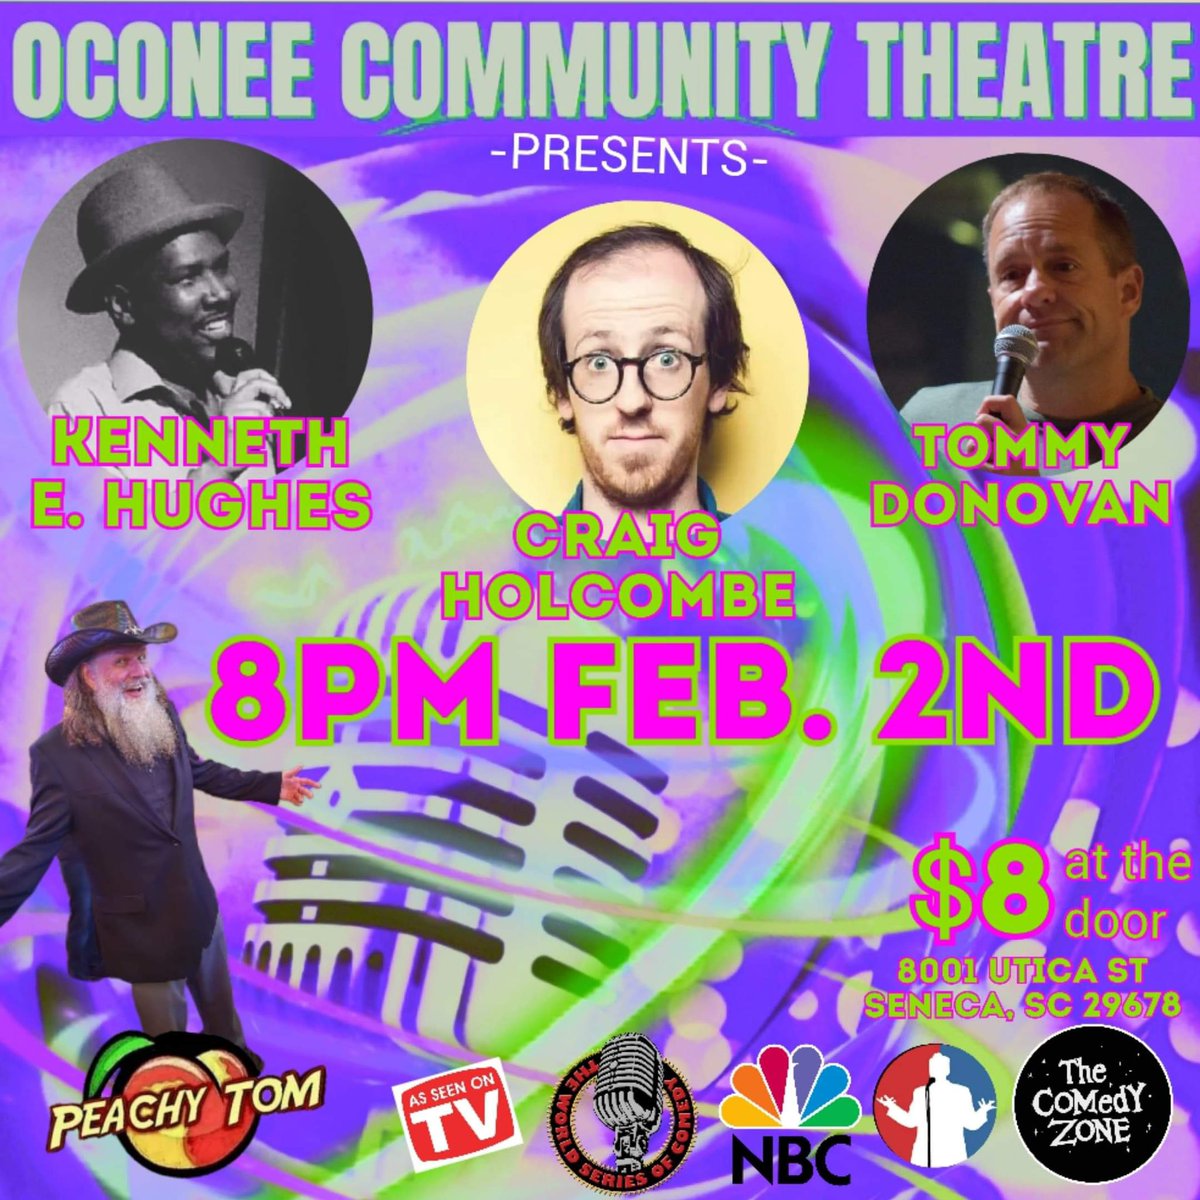 Looking forward to another GREAT show at the Oconee Community Theater with Craig Holcombe, Kenneth Hughes, and Peachy Tom!!!See you Friday night at 8pm!!!
.
.
.
#standup#standupcomedyshow #comedyshow #livestandup #livecomedy #clemsonsc #senecasc  #upstatesc #upstatescevents